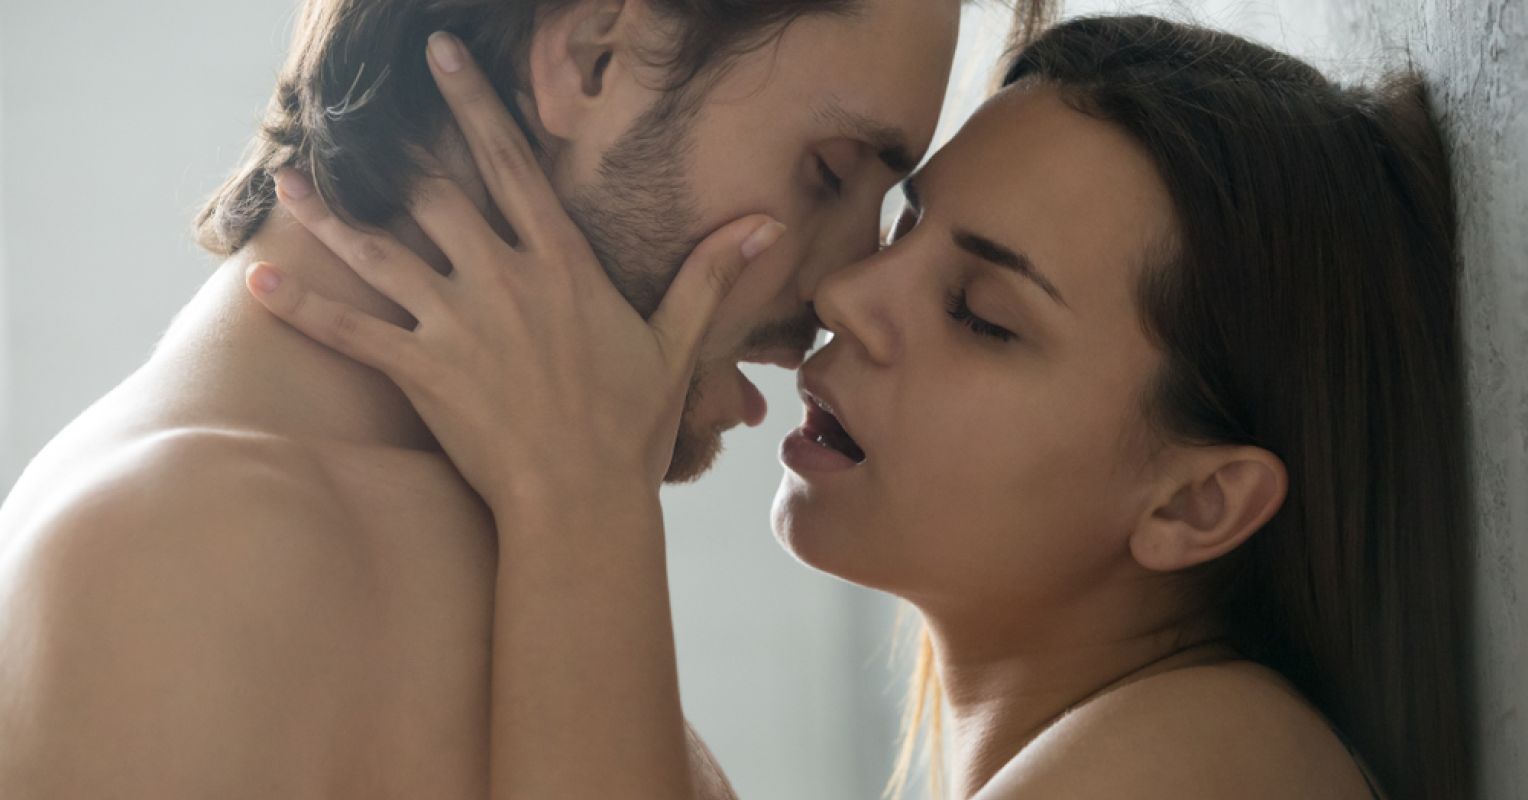 Why We Scream and Moan During Sex Psychology Today image